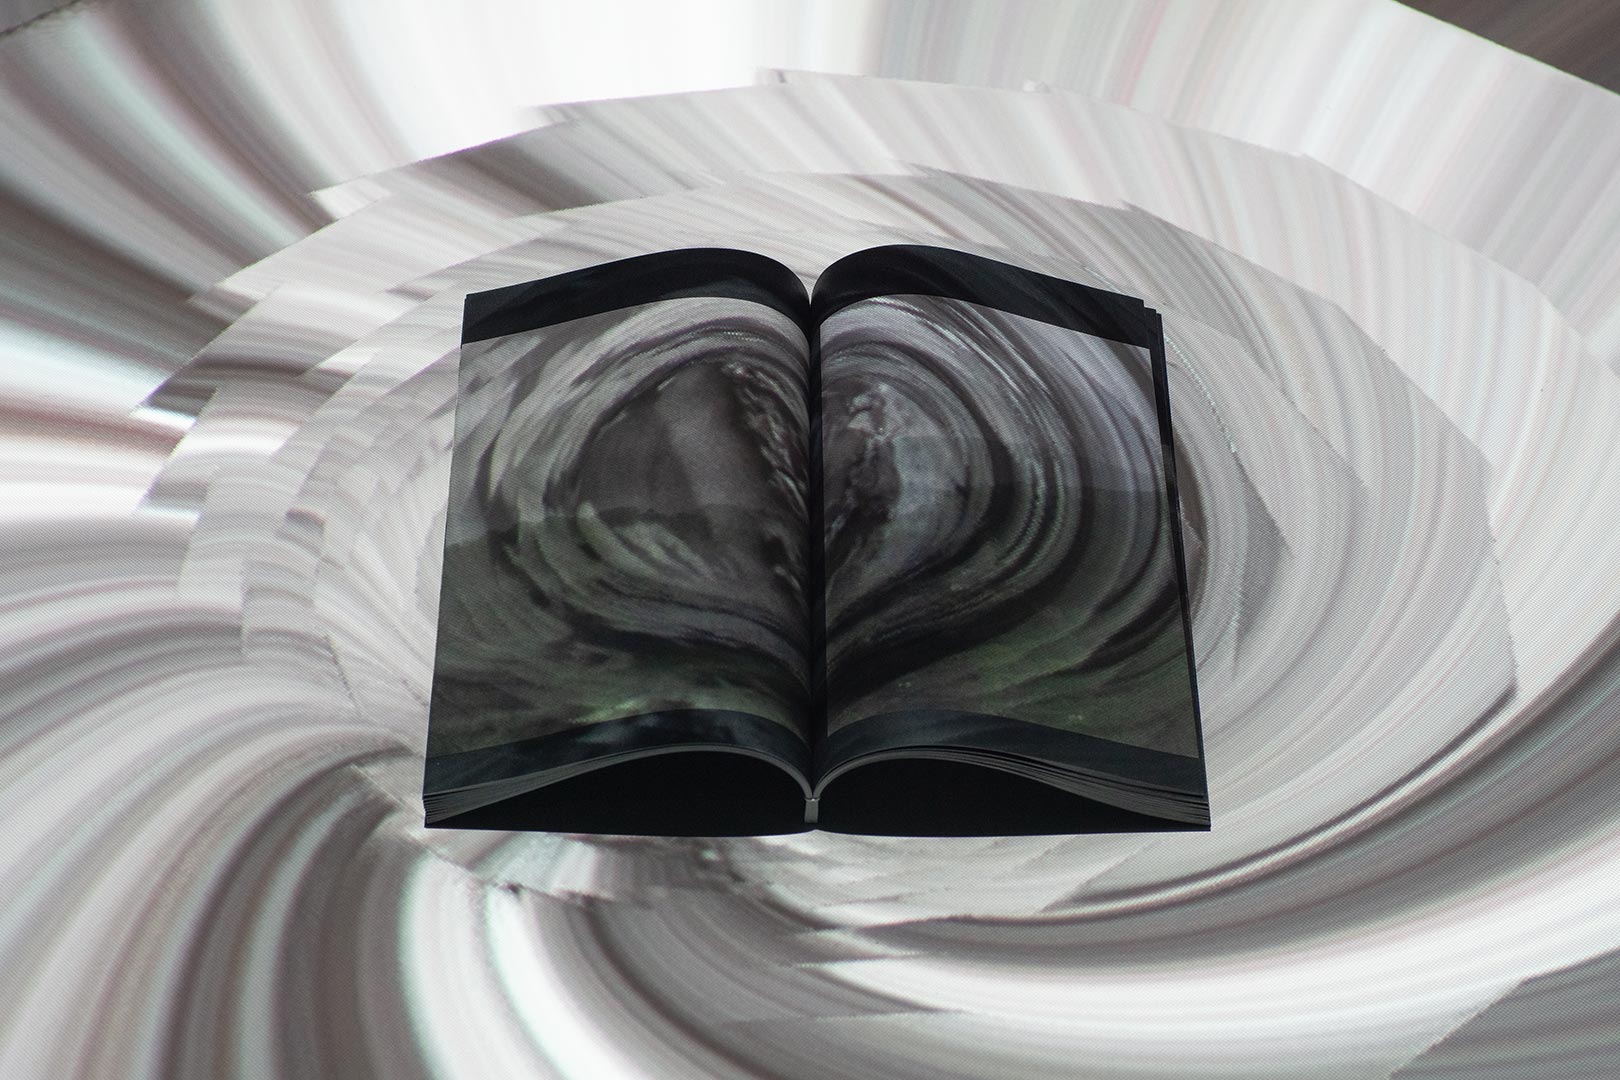 Gallery Refugium book at the exhibition with projection